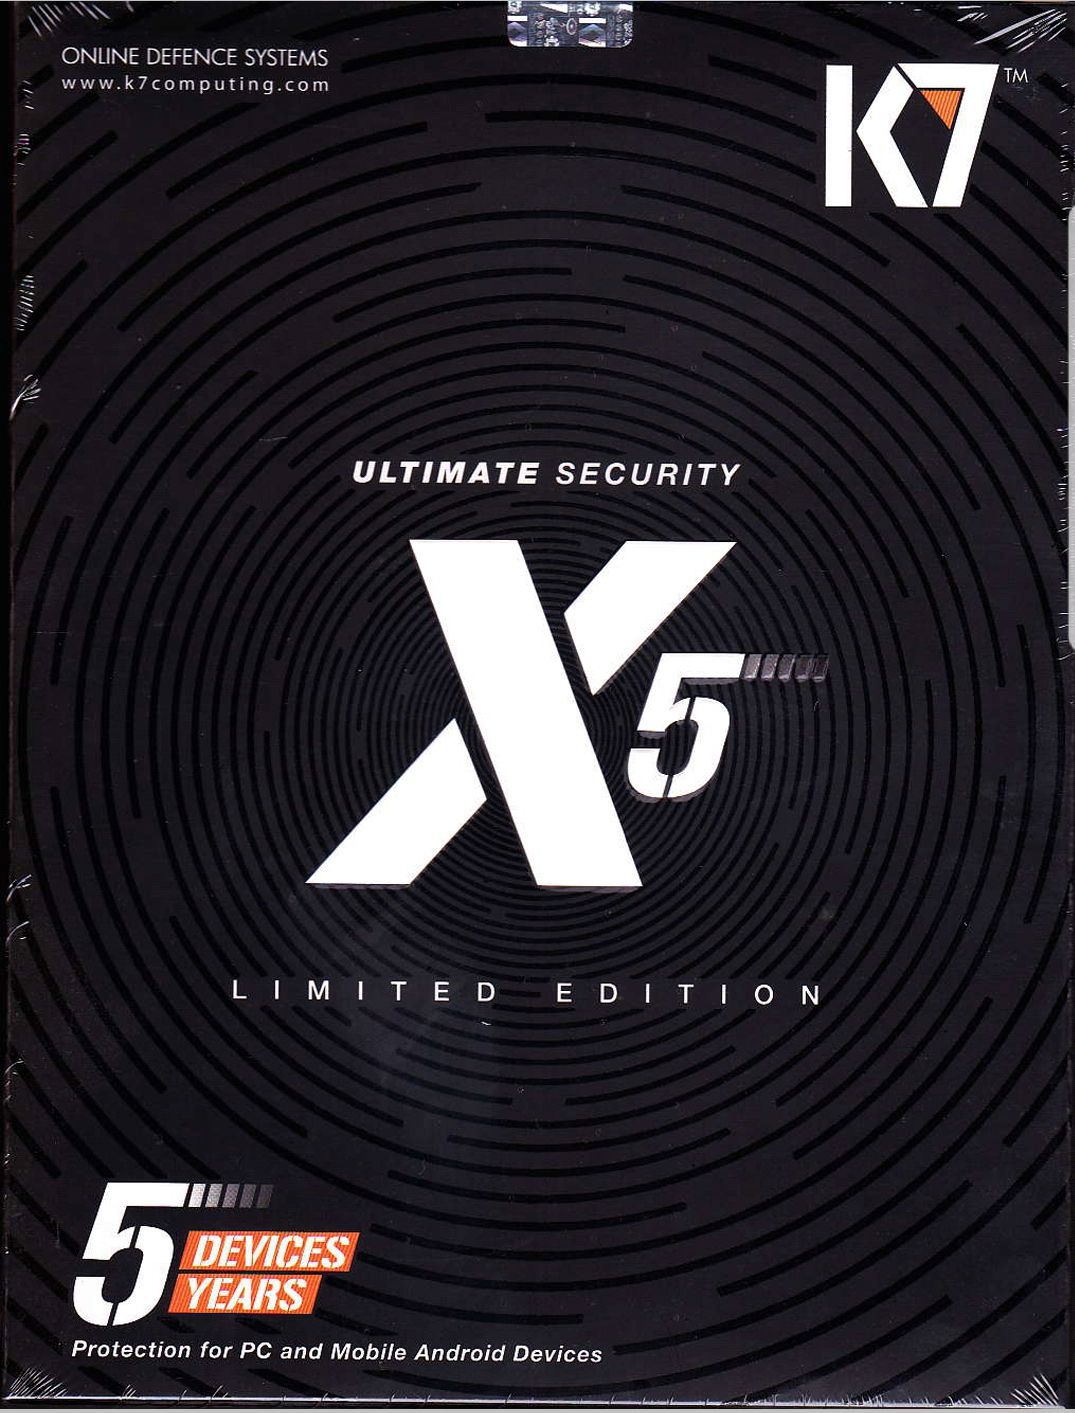 k7 total security review